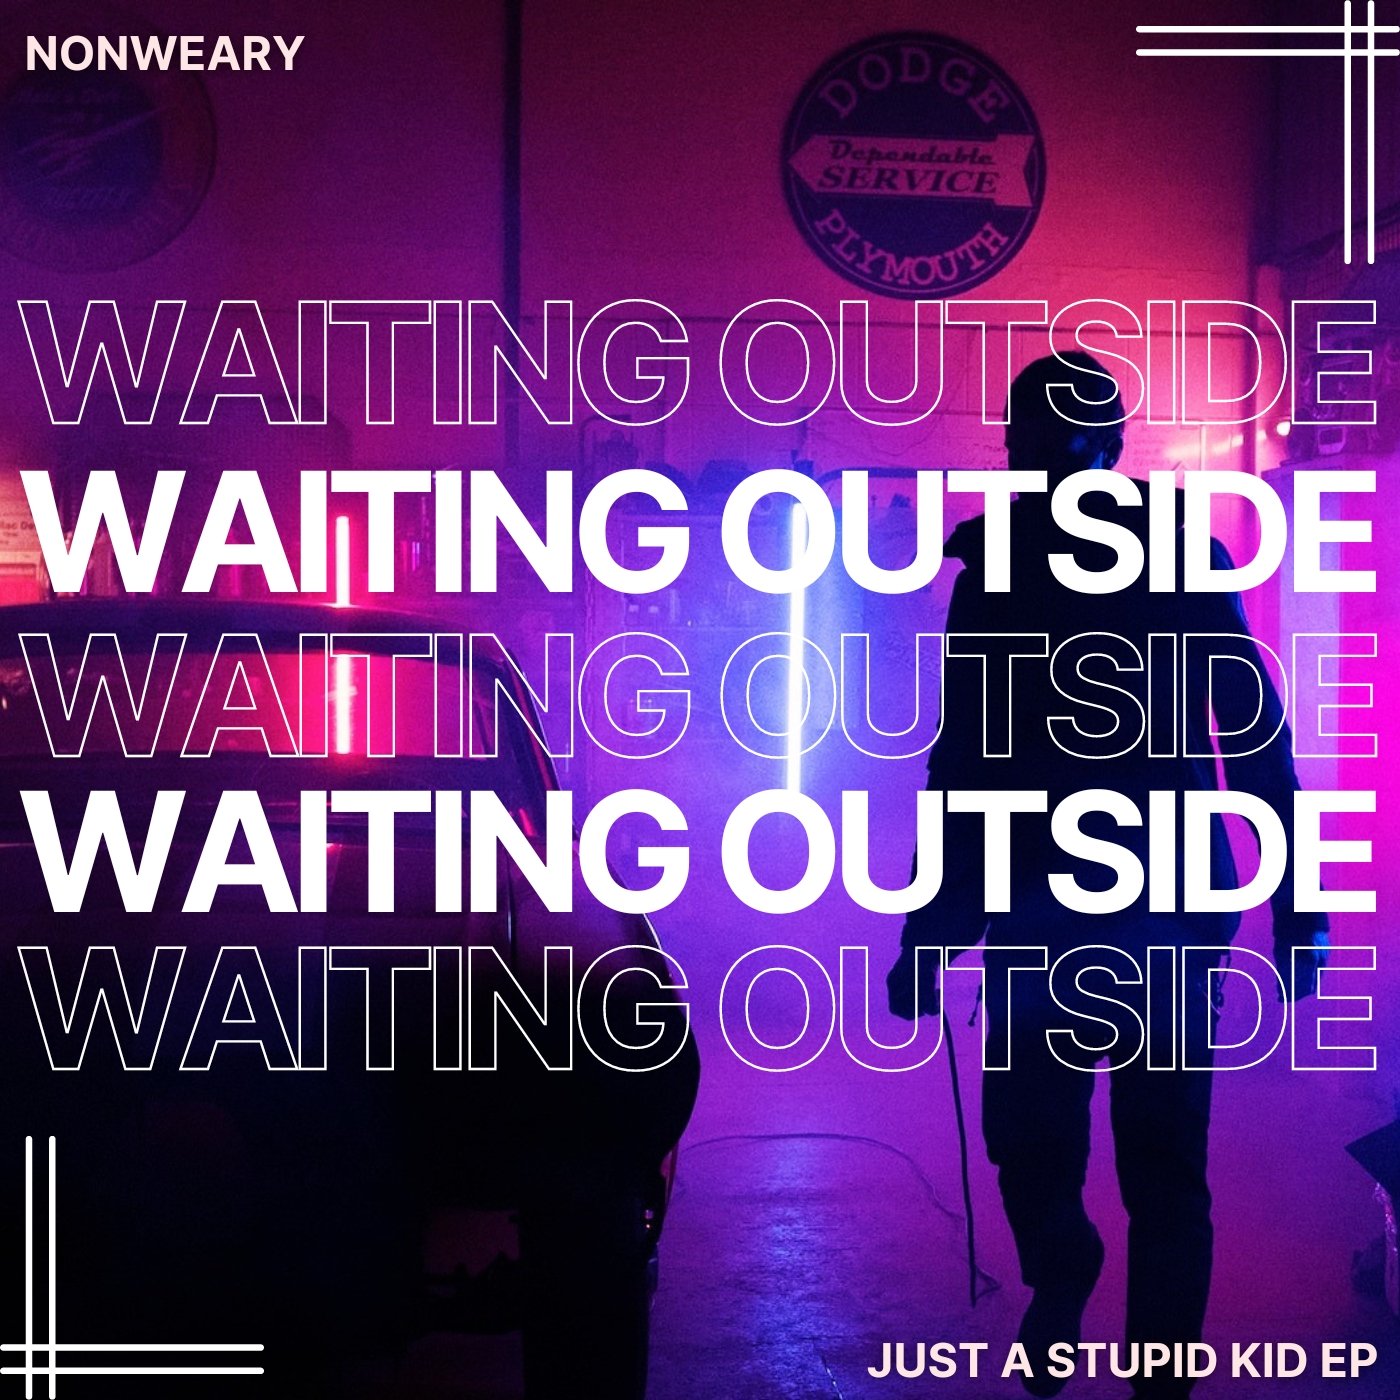 Waiting Outside - NonWeary - Scraps Audio